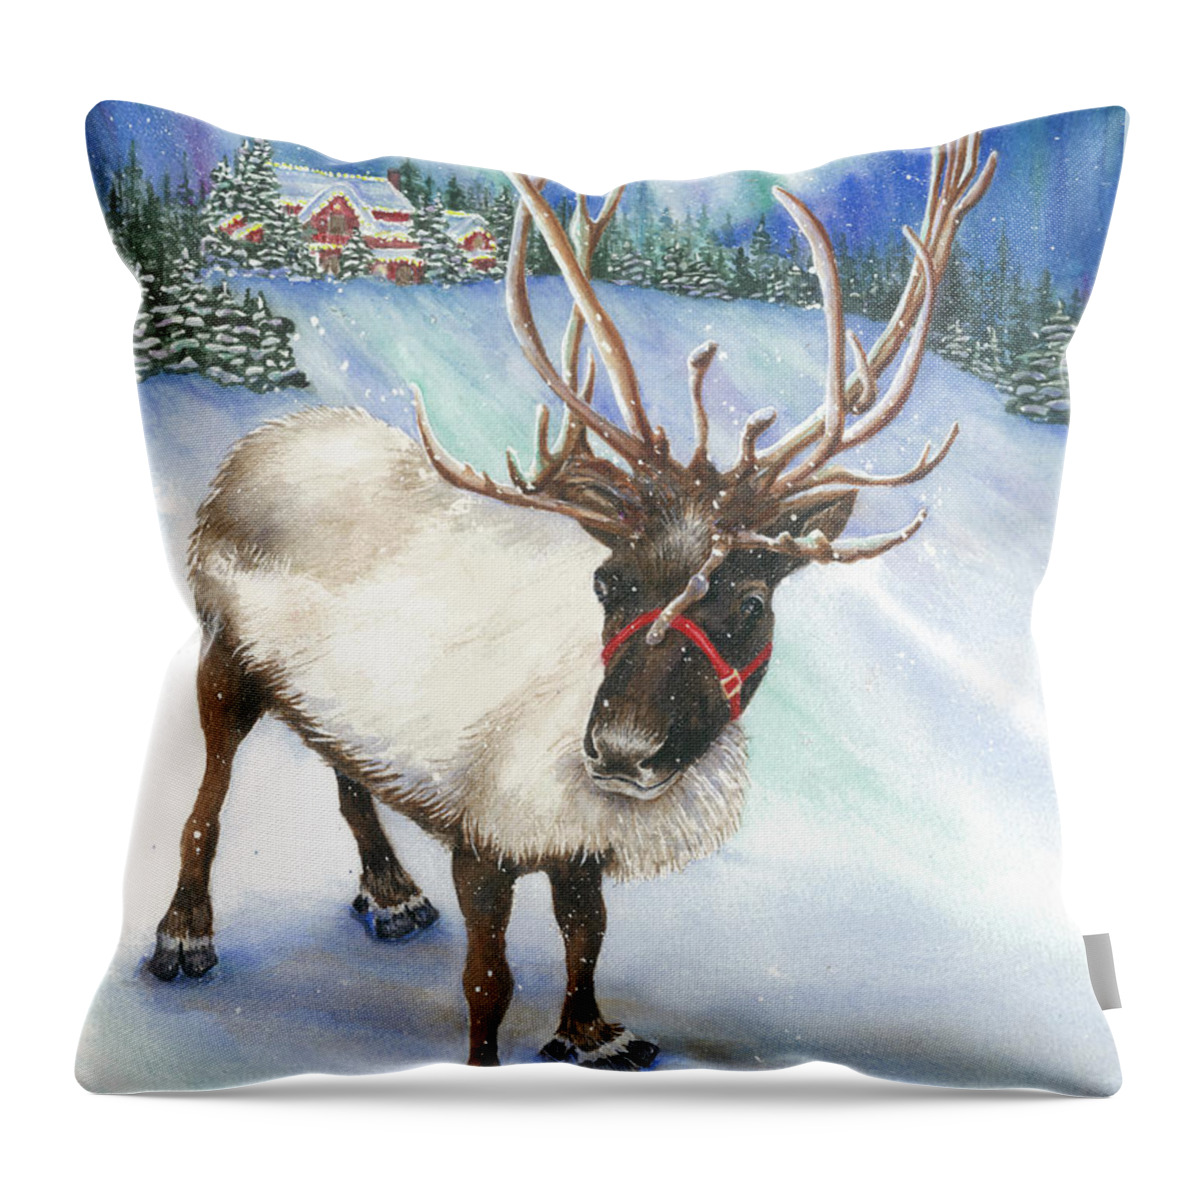 Reindeer Throw Pillow featuring the painting A Winter's Walk by Lori Taylor